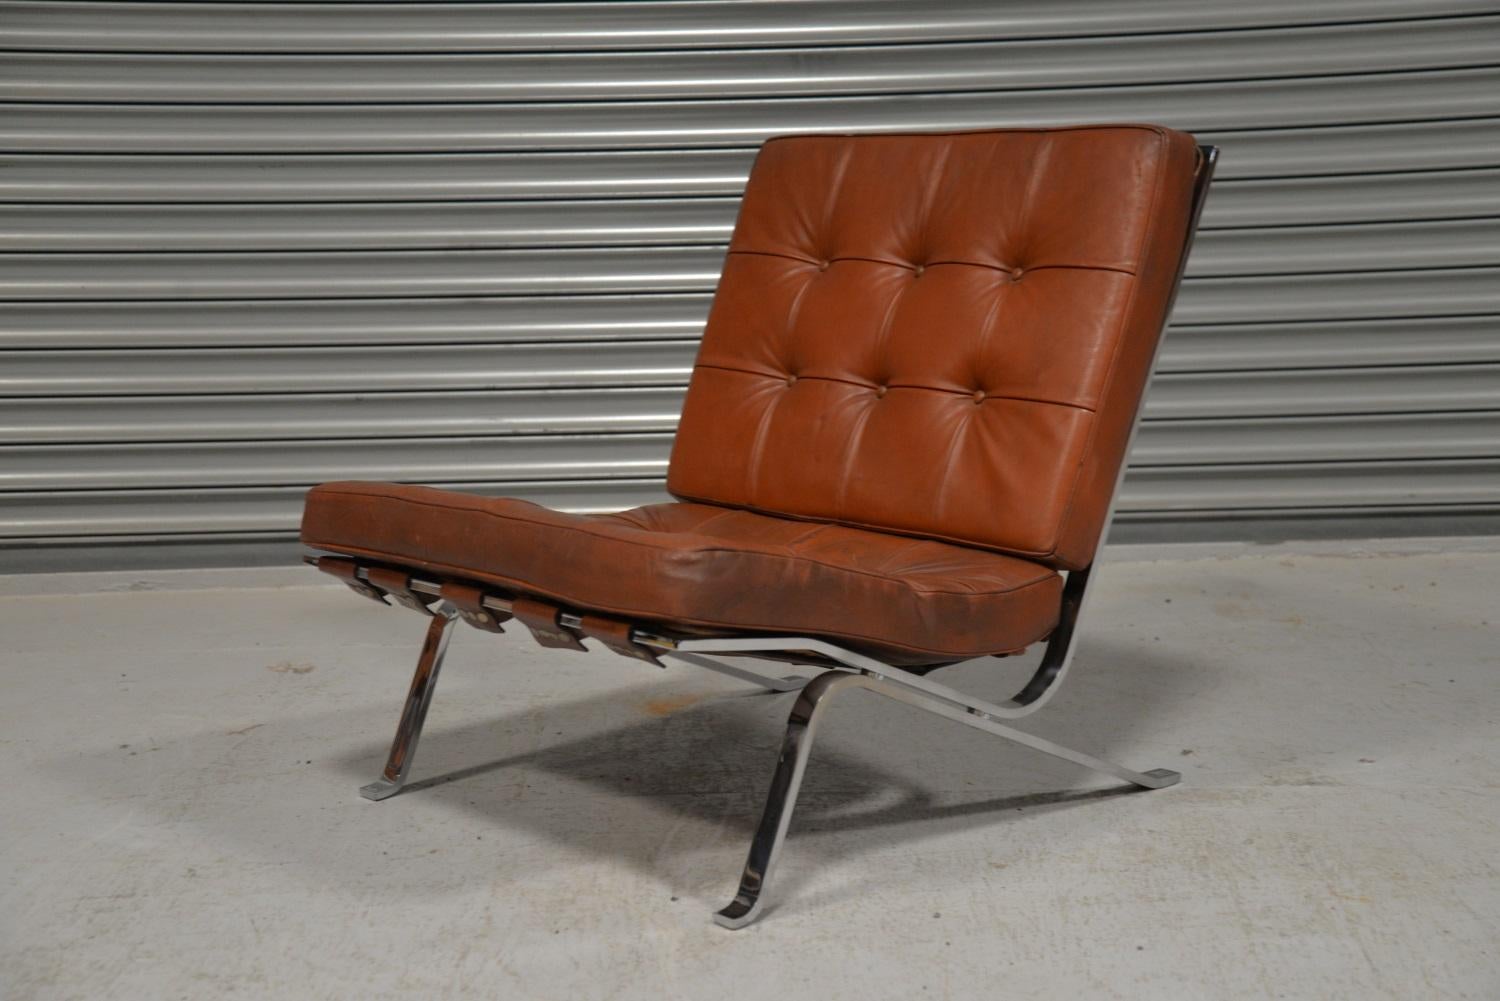 We are delighted to bring to you a rare vintage RH-301 flat bar lounge chair in original tan leather designed by Robert Haussmann for de Sede. Hand built in the 1950s this rare lounge chair has a chrome plated steel frame with leather strap